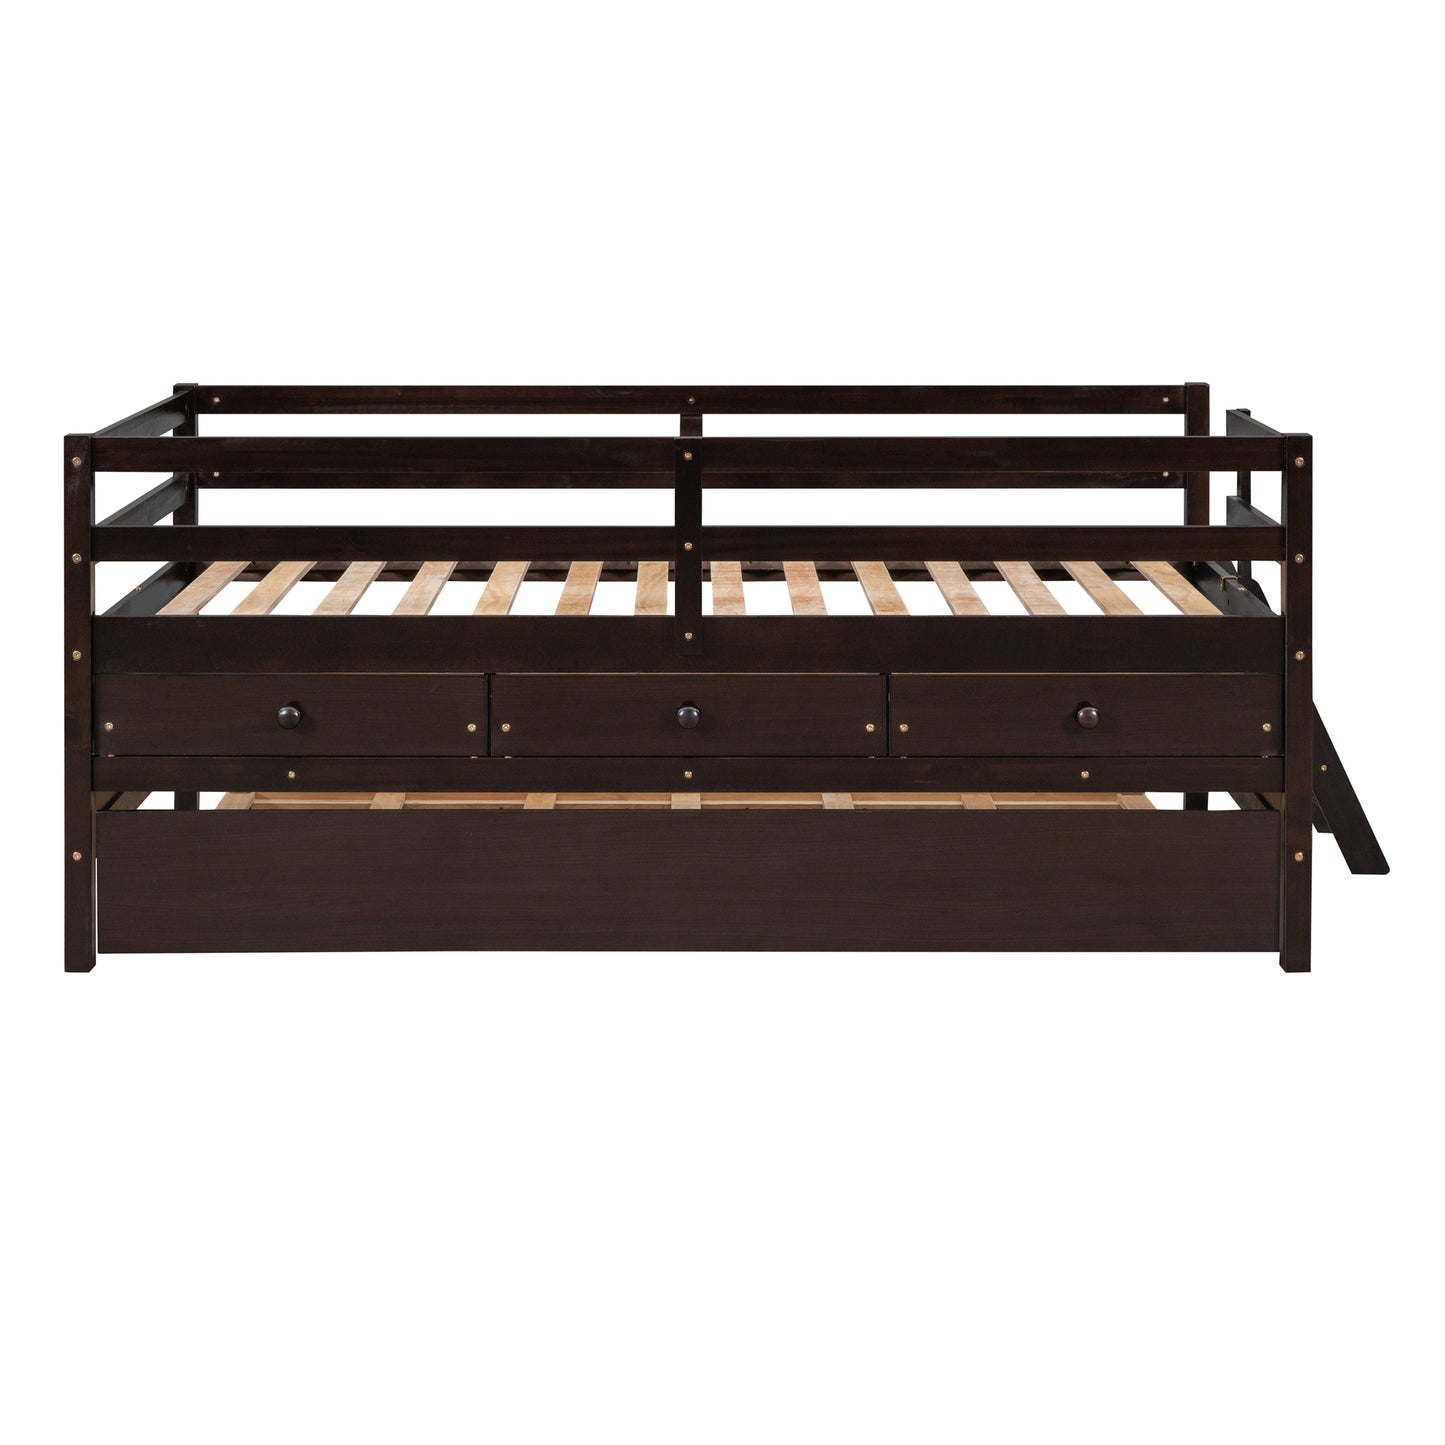 Low Loft Bed Twin Size with Full Safety Fence, Climbing ladder, Storage Drawers and Trundle Espresso Solid Wood Bed